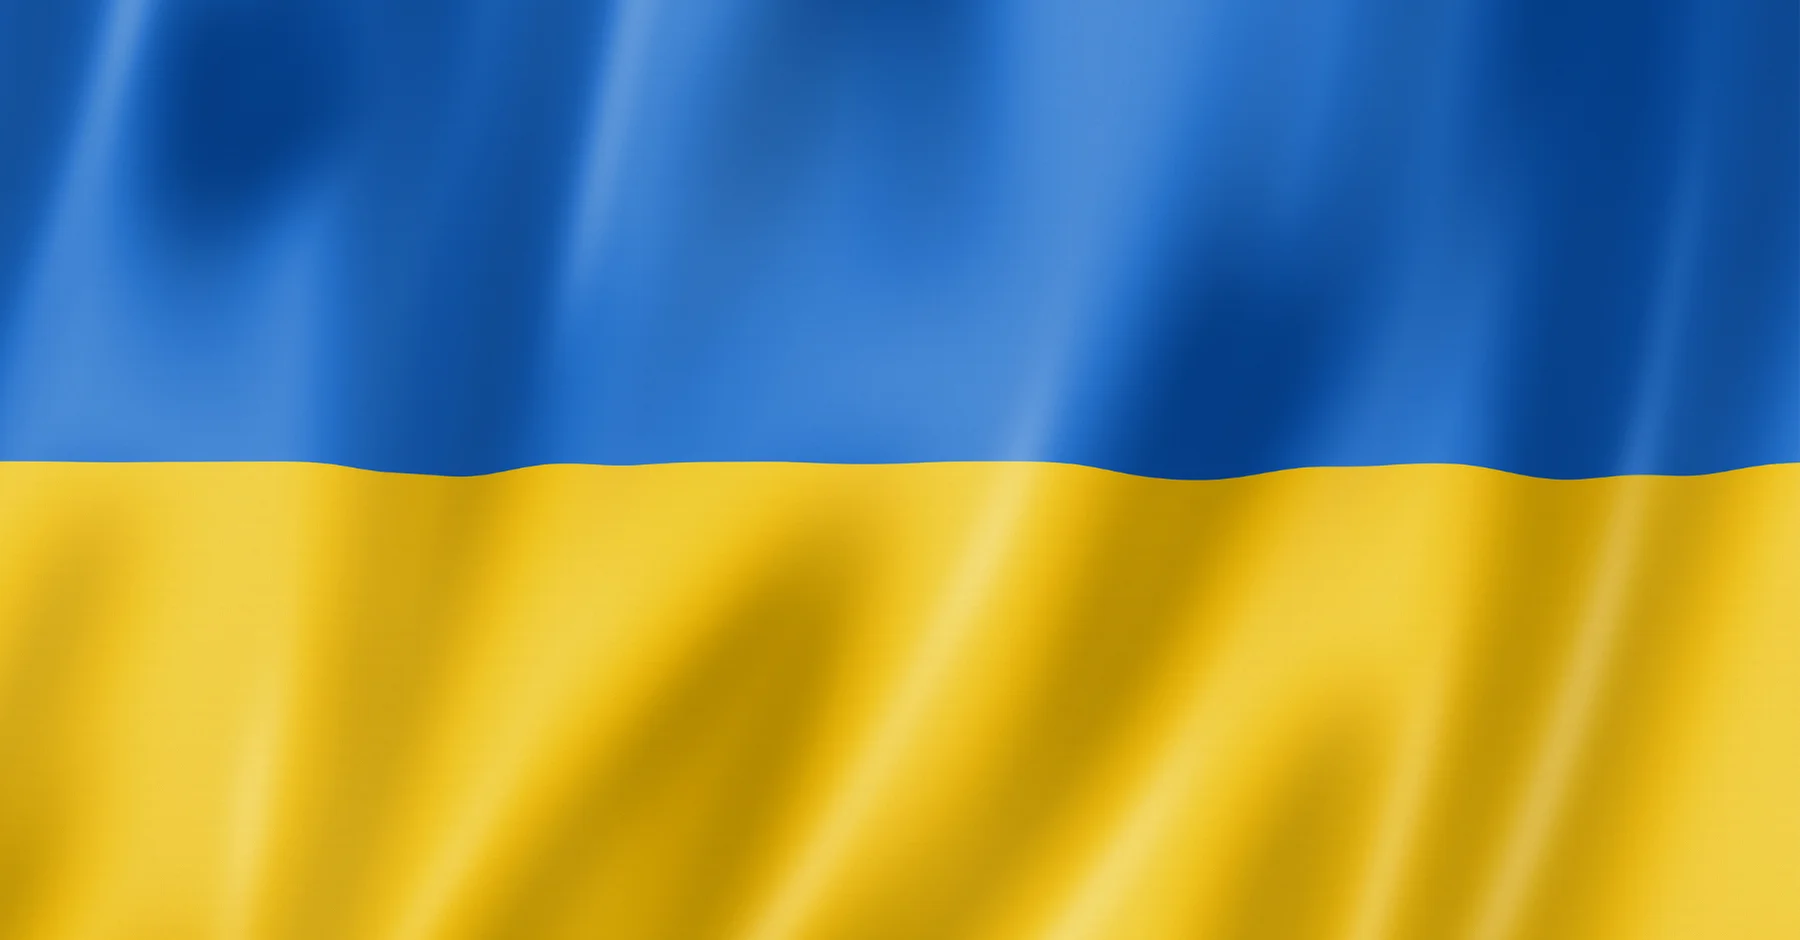 Consult Red creates charitable fund and comes together for Ukraine